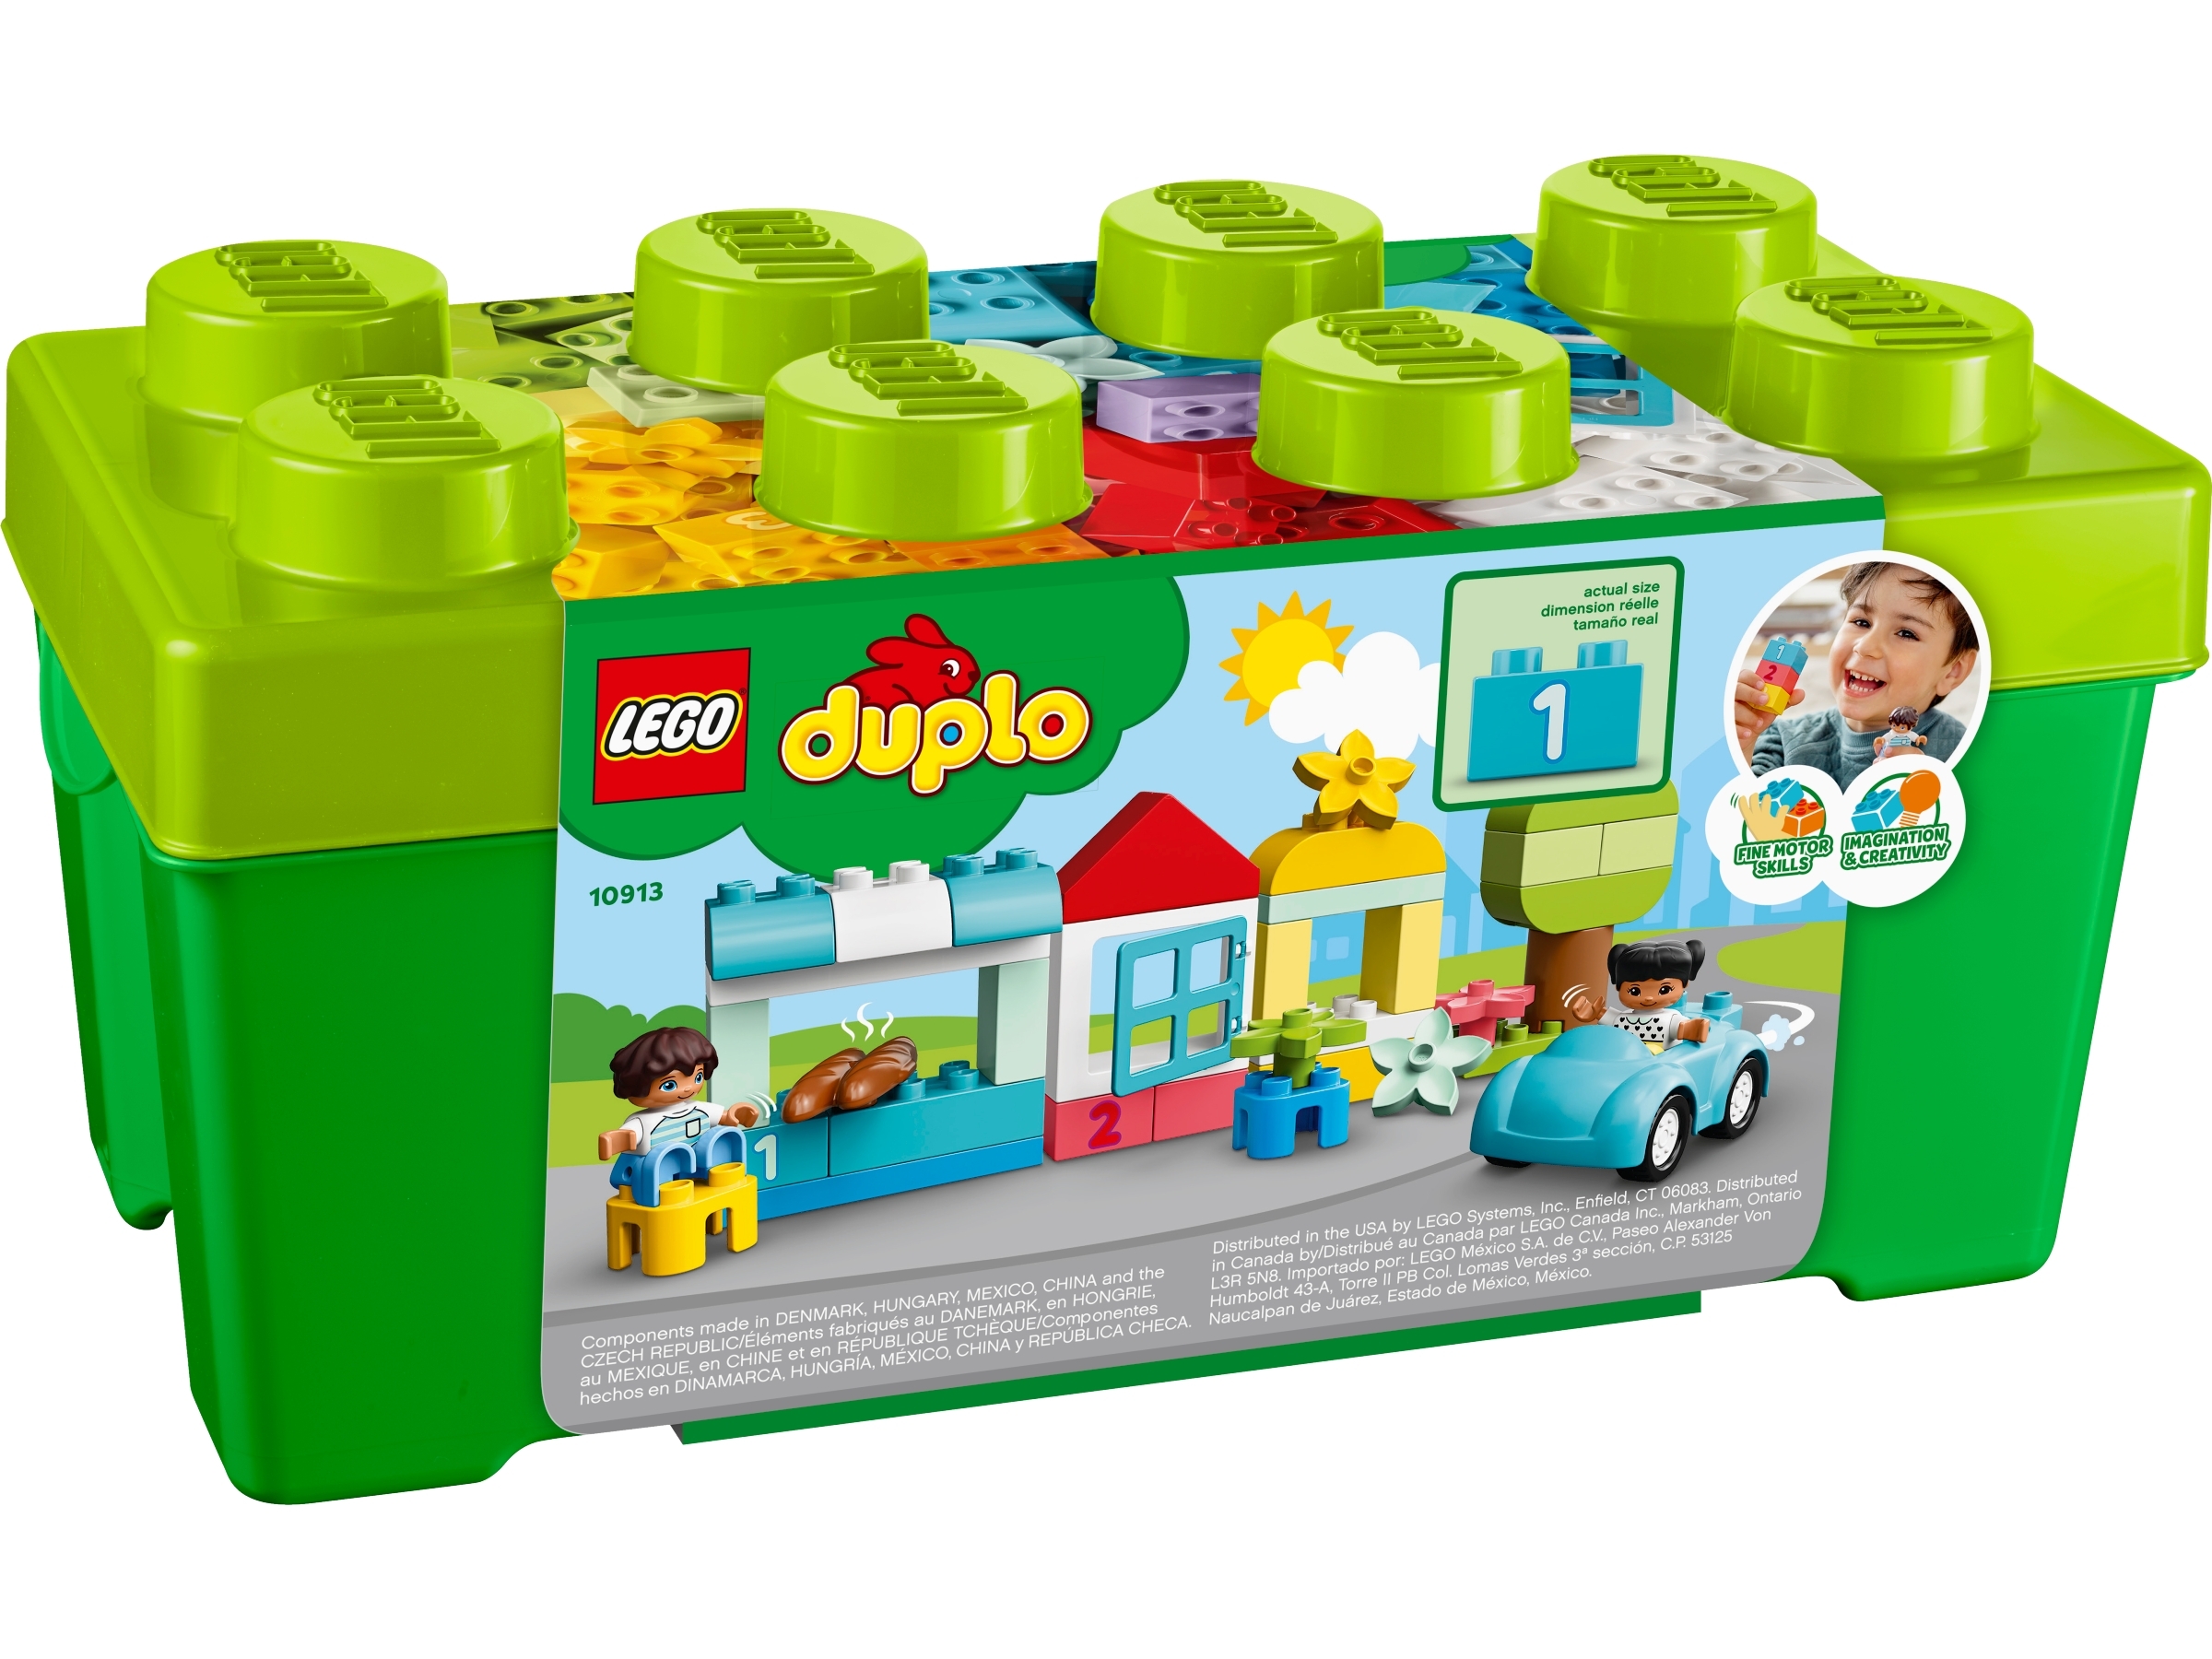 LEGO DUPLO 10913 Classic Building Brick Box Set 65 Pieces for Toddlers 1½ Years+ 